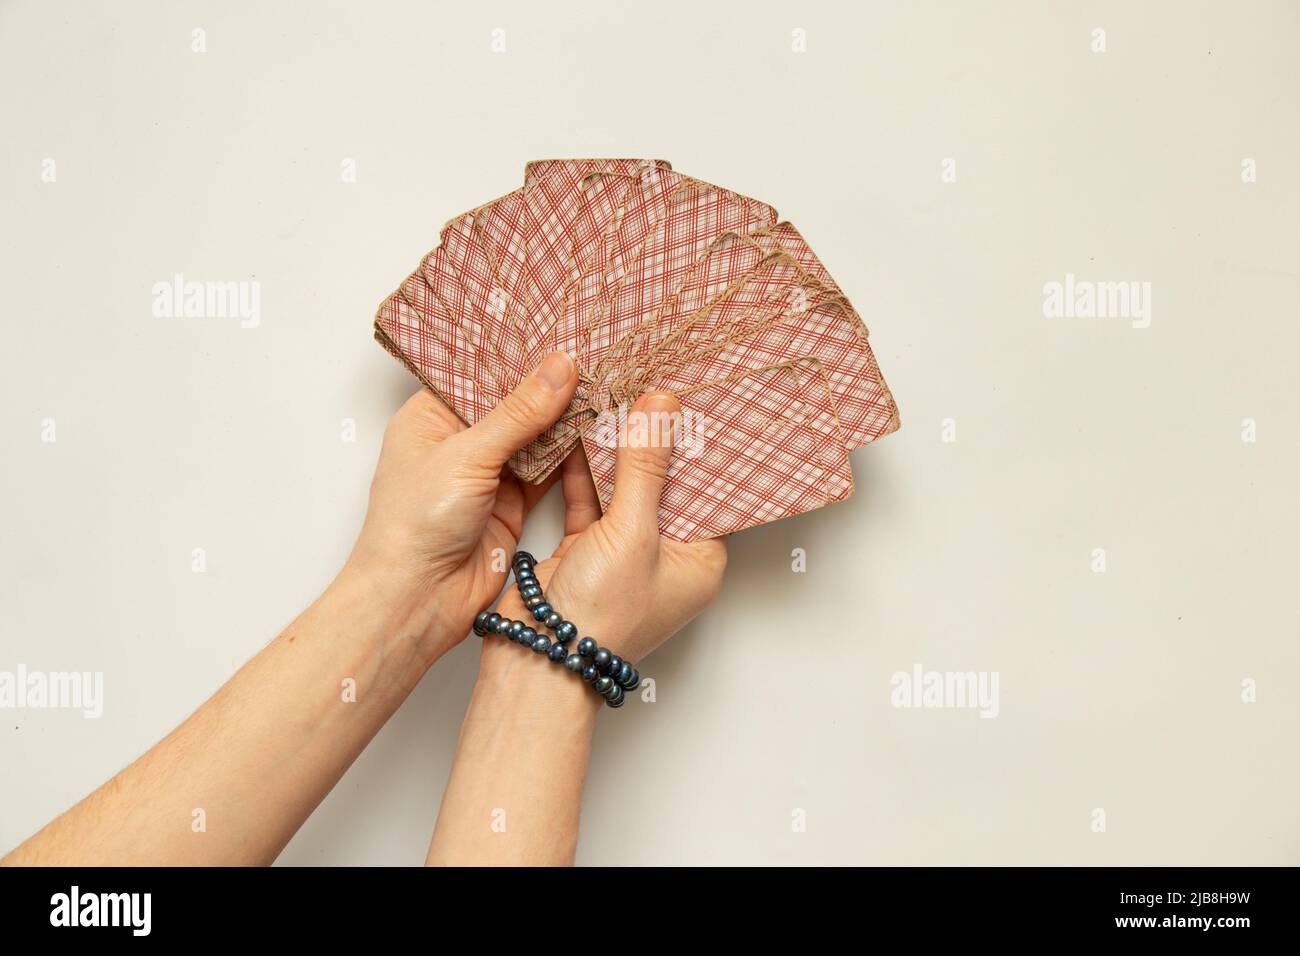 fortune-telling cards in the hands of a girl, a layout on cards for predicting fate by cards Stock Photo